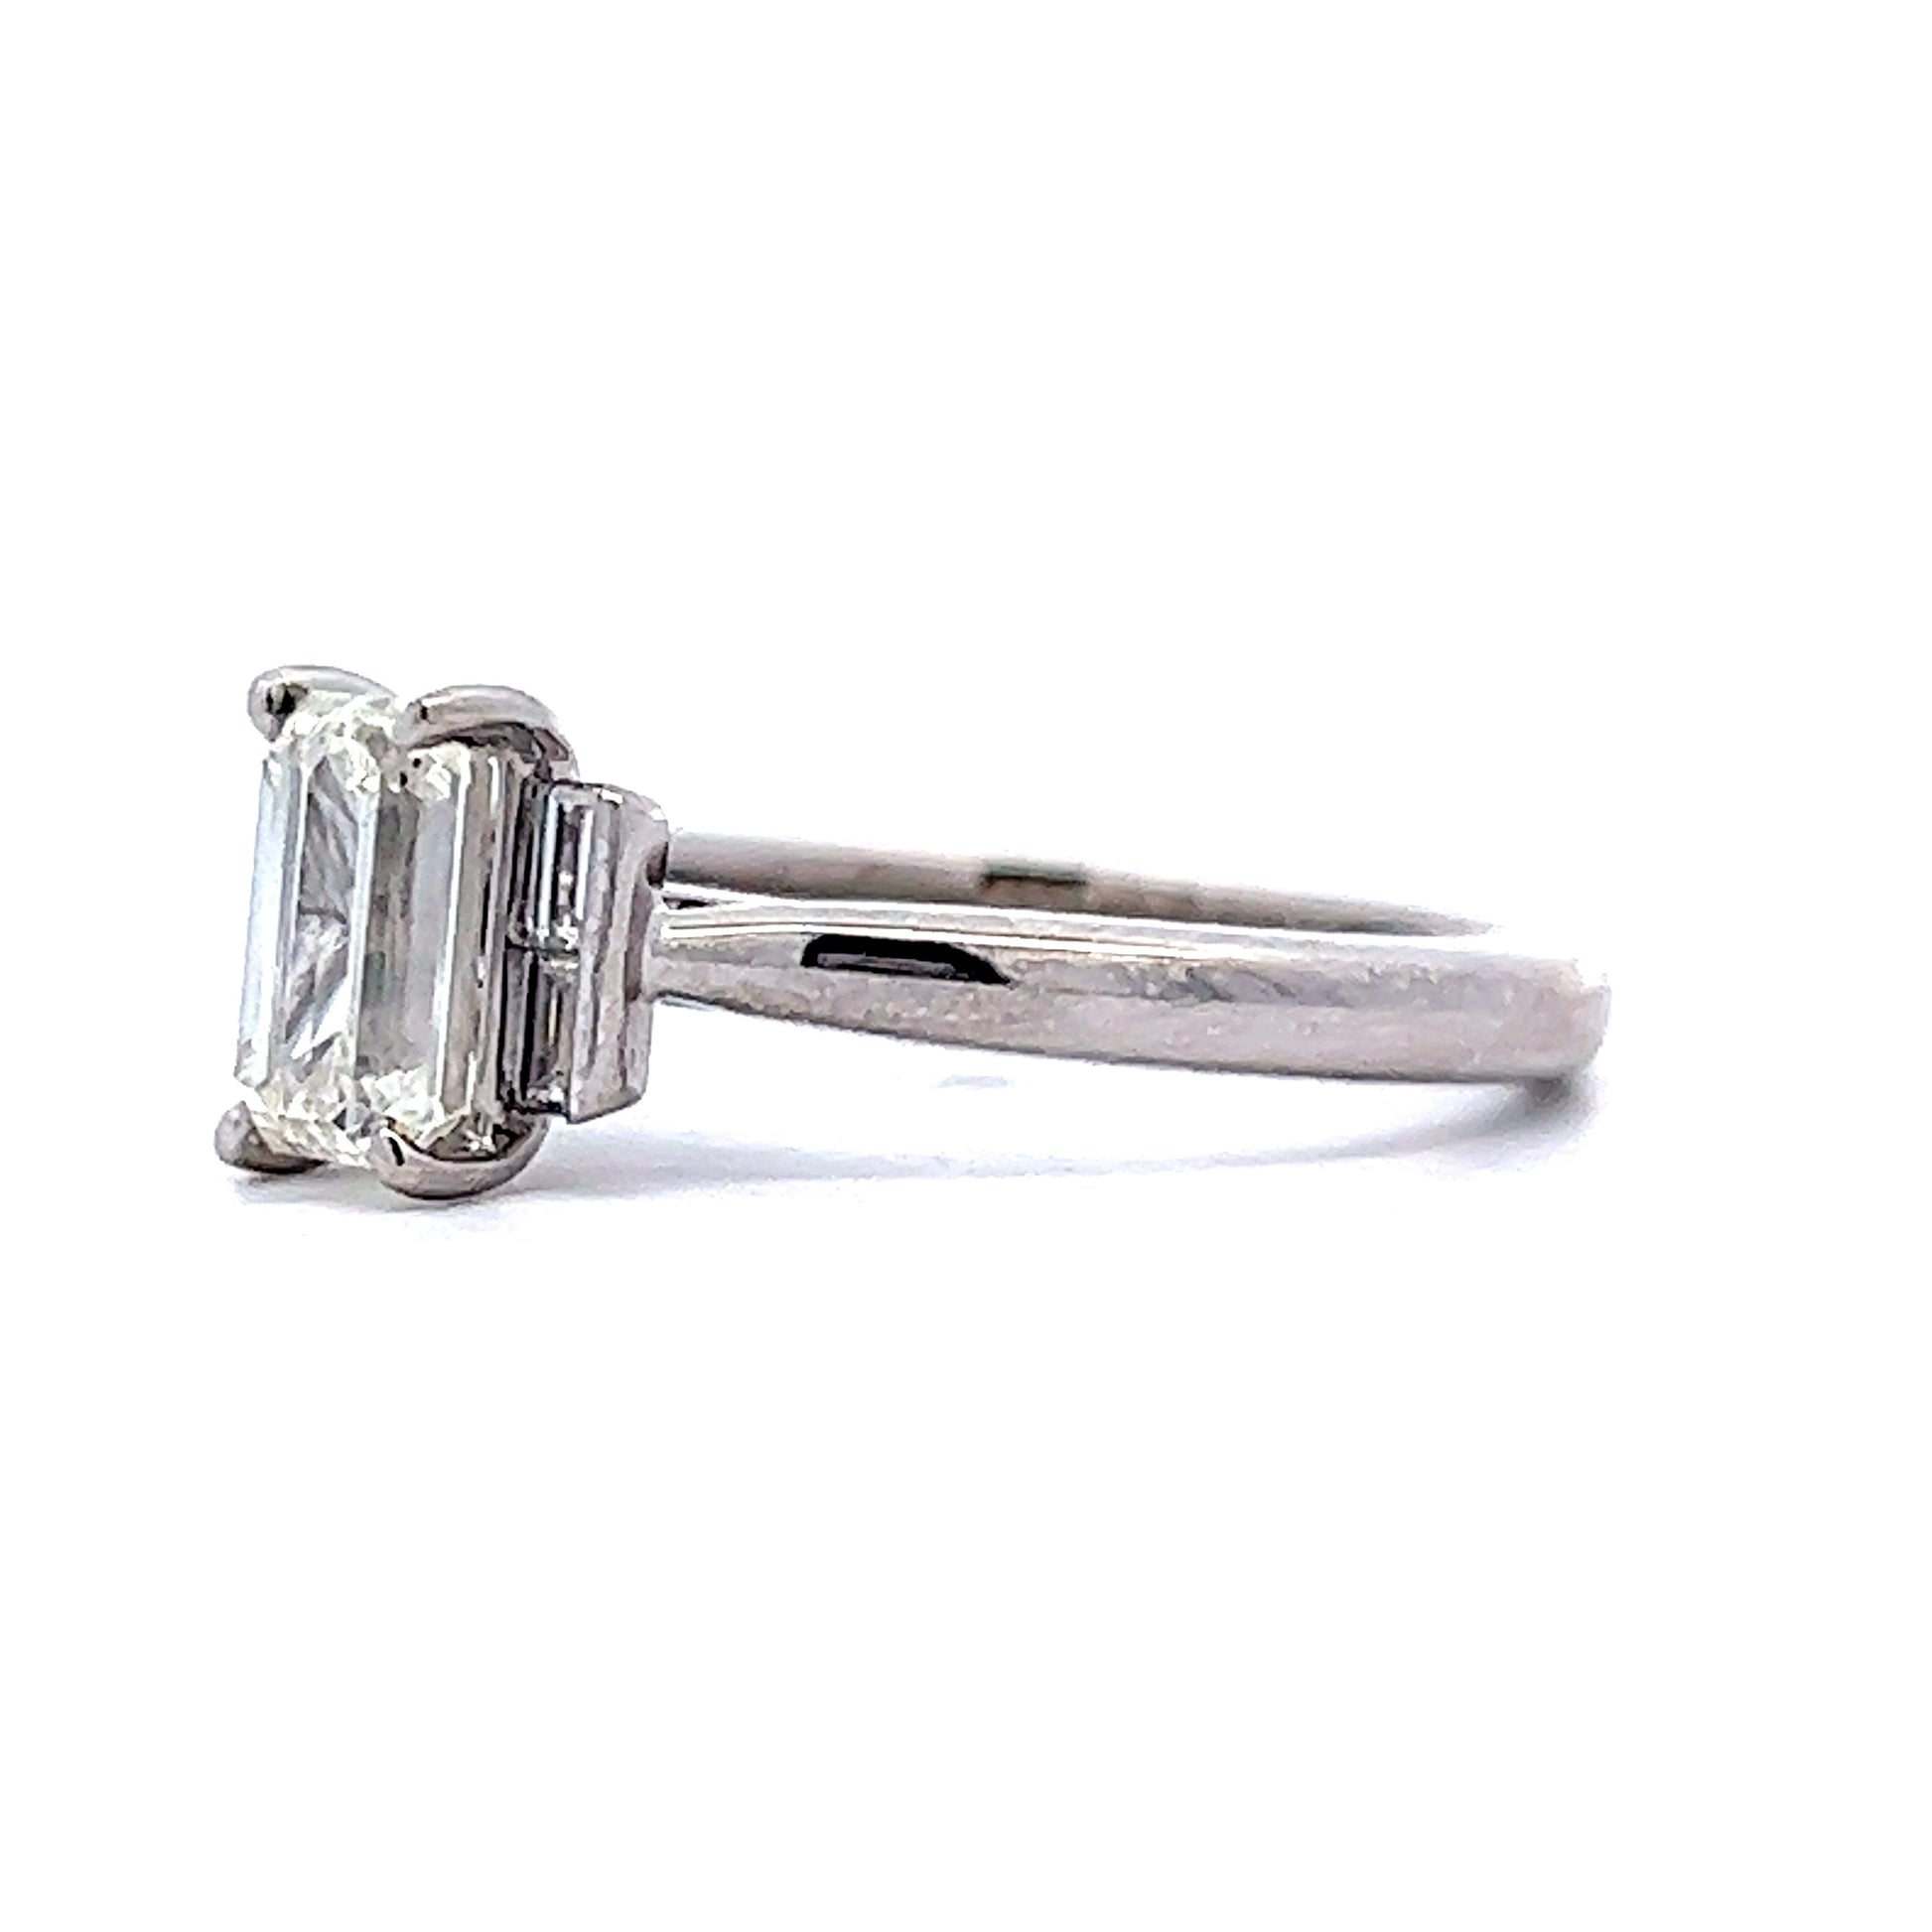 1.03 Three Stone Emerald Cut Engagement Ring in 14k White Gold